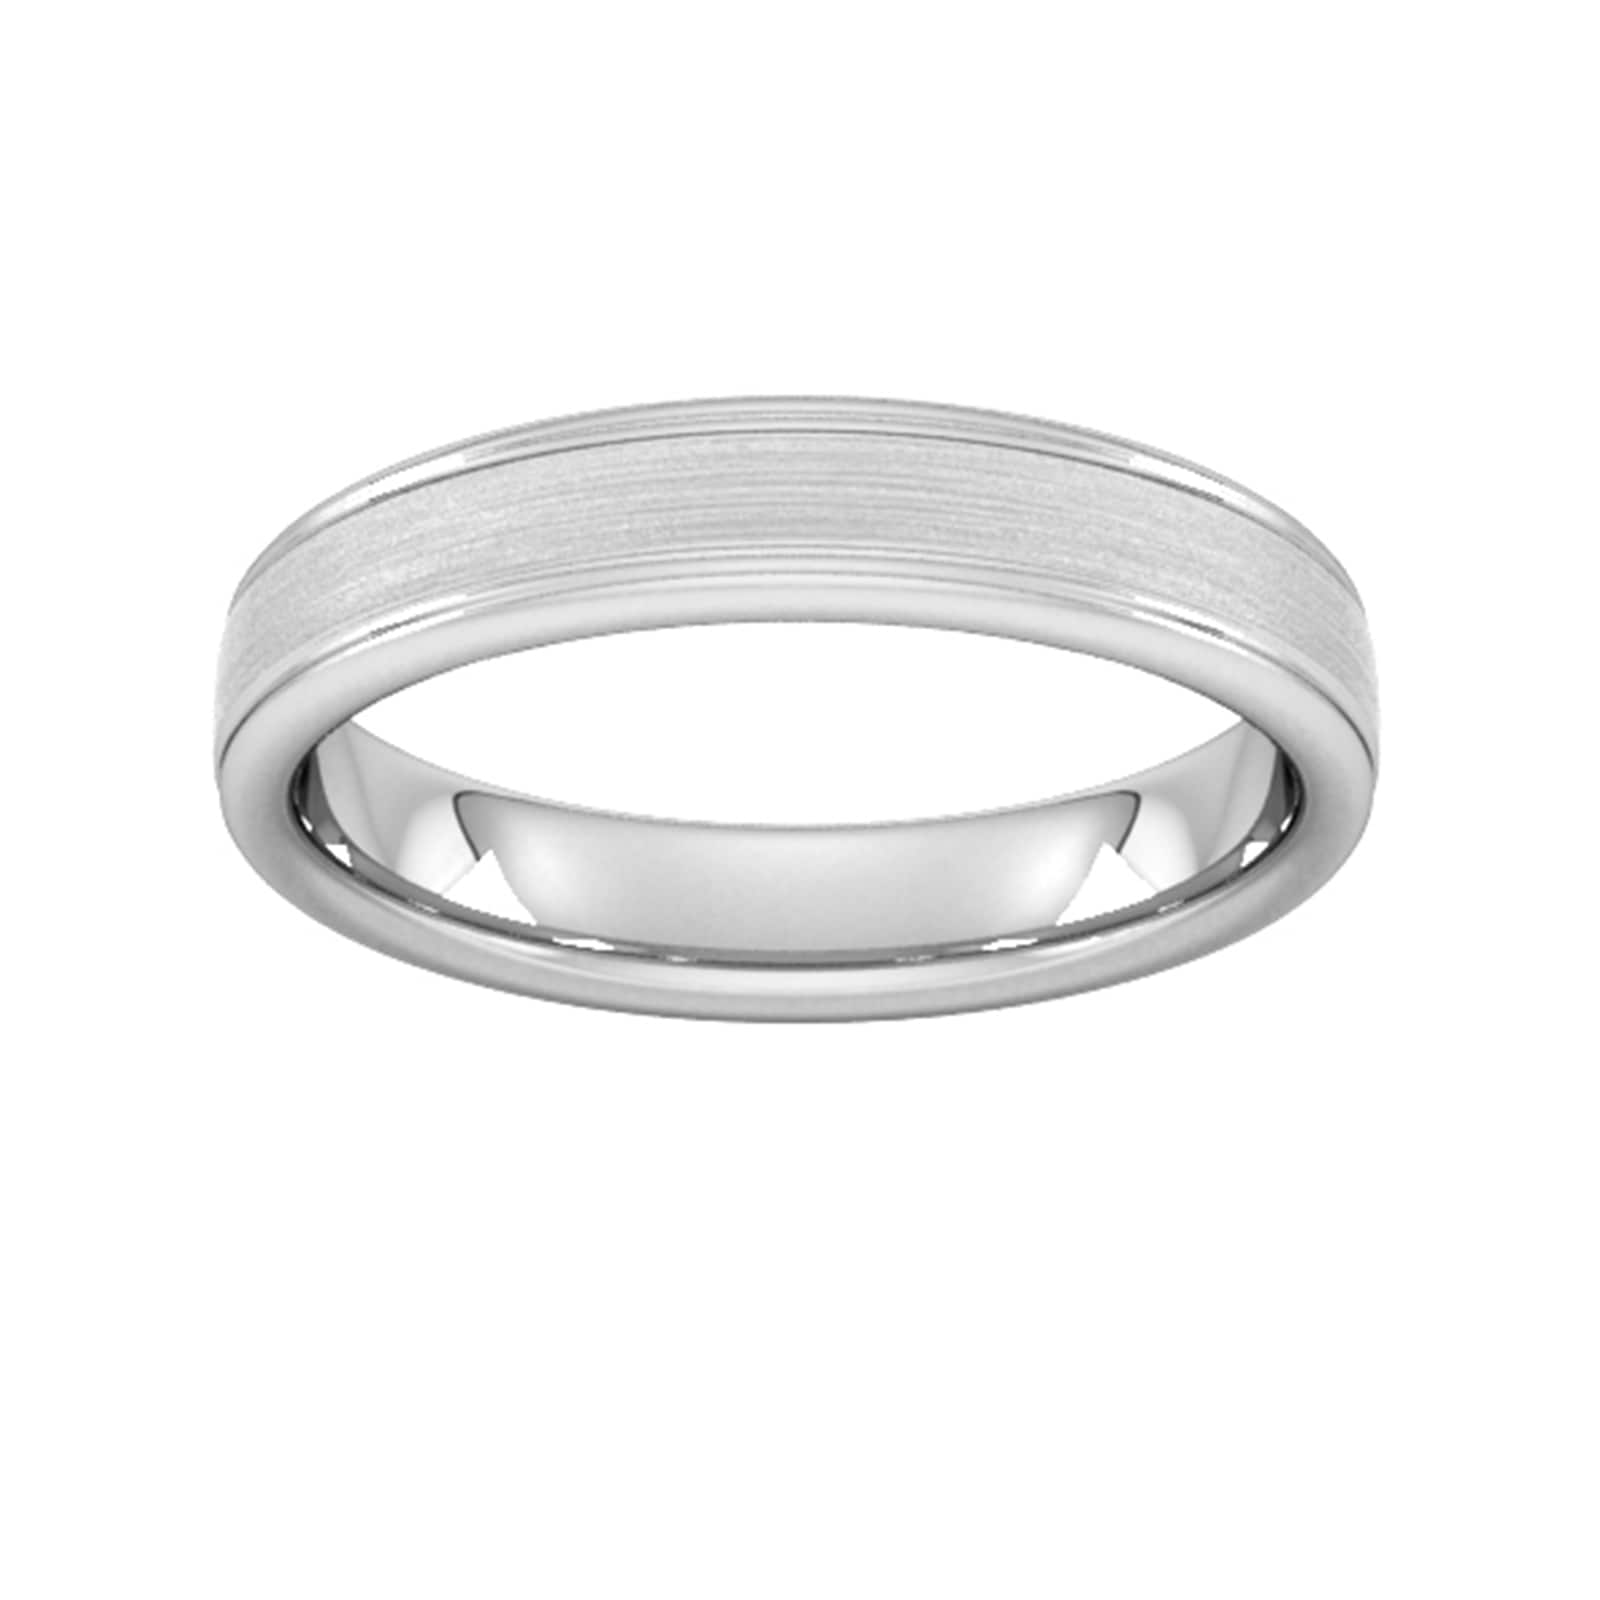 4mm Traditional Court Standard Matt Centre With Grooves Wedding Ring In 9 Carat White Gold - Ring Size K